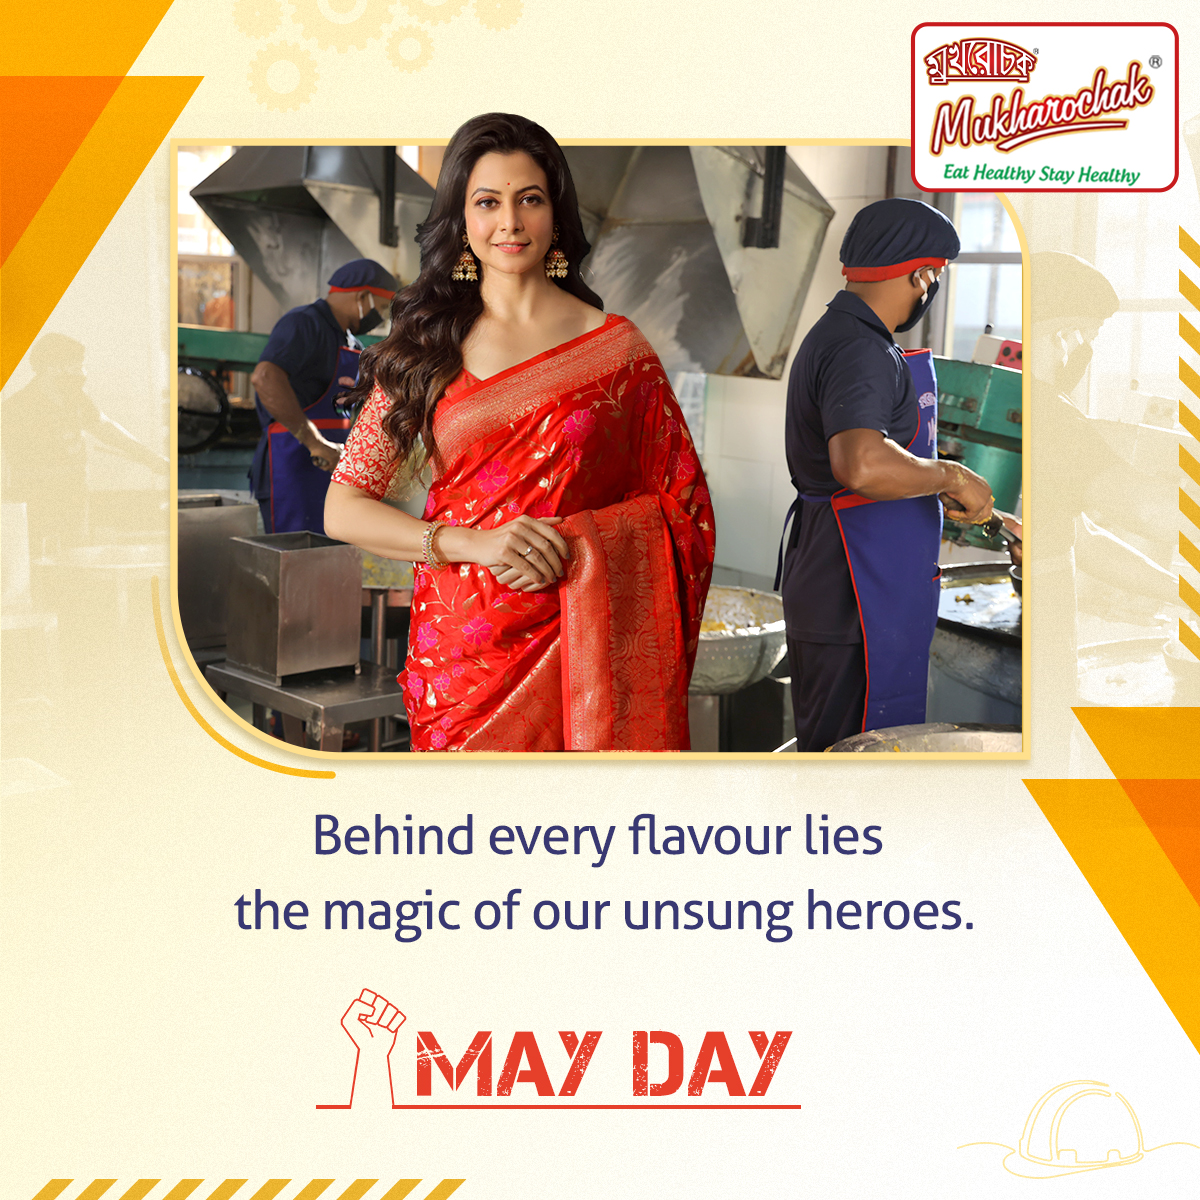 Mukharochak salutes the indomitable spirit of all the workers. It is because of their labour of love and hard work that we have been successful.
.
.
#Mukharochak #LabourDay2024 #KoelMallick #SnackSmart #HealthySnacksForever #MayDay #FactoryChampions